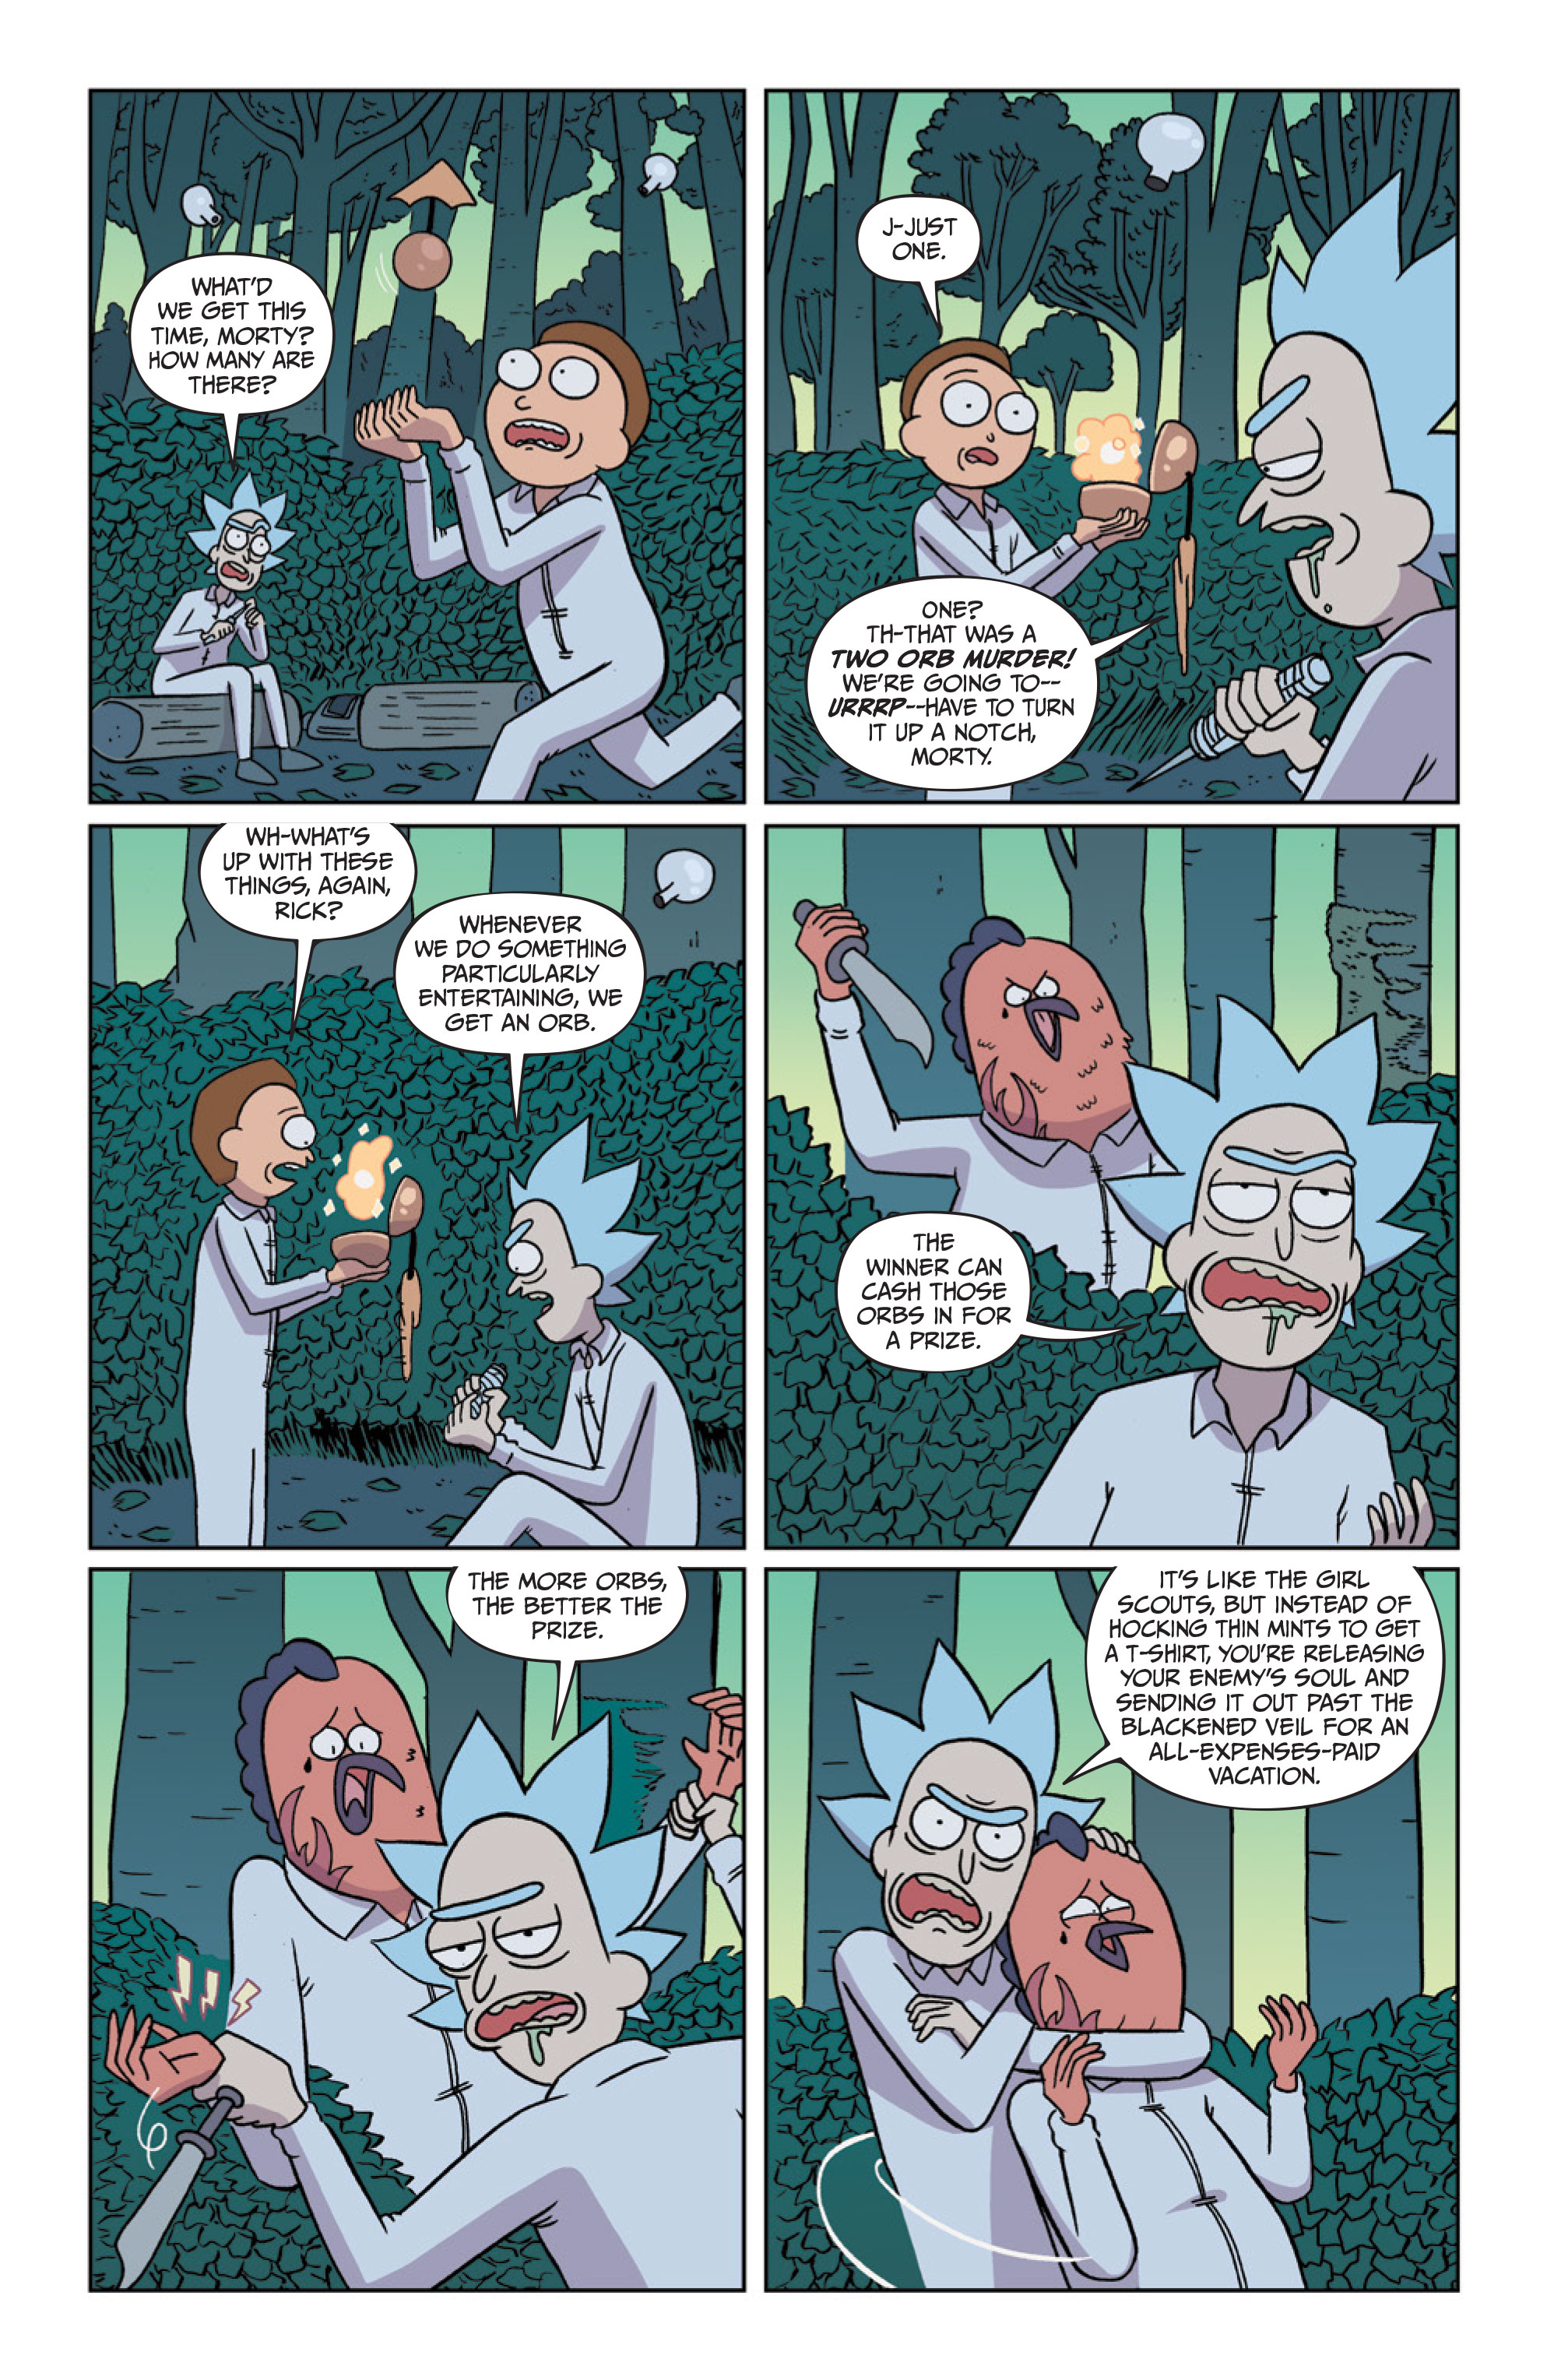 Pages-from-RICKMORTY-#40-MARKETING-12